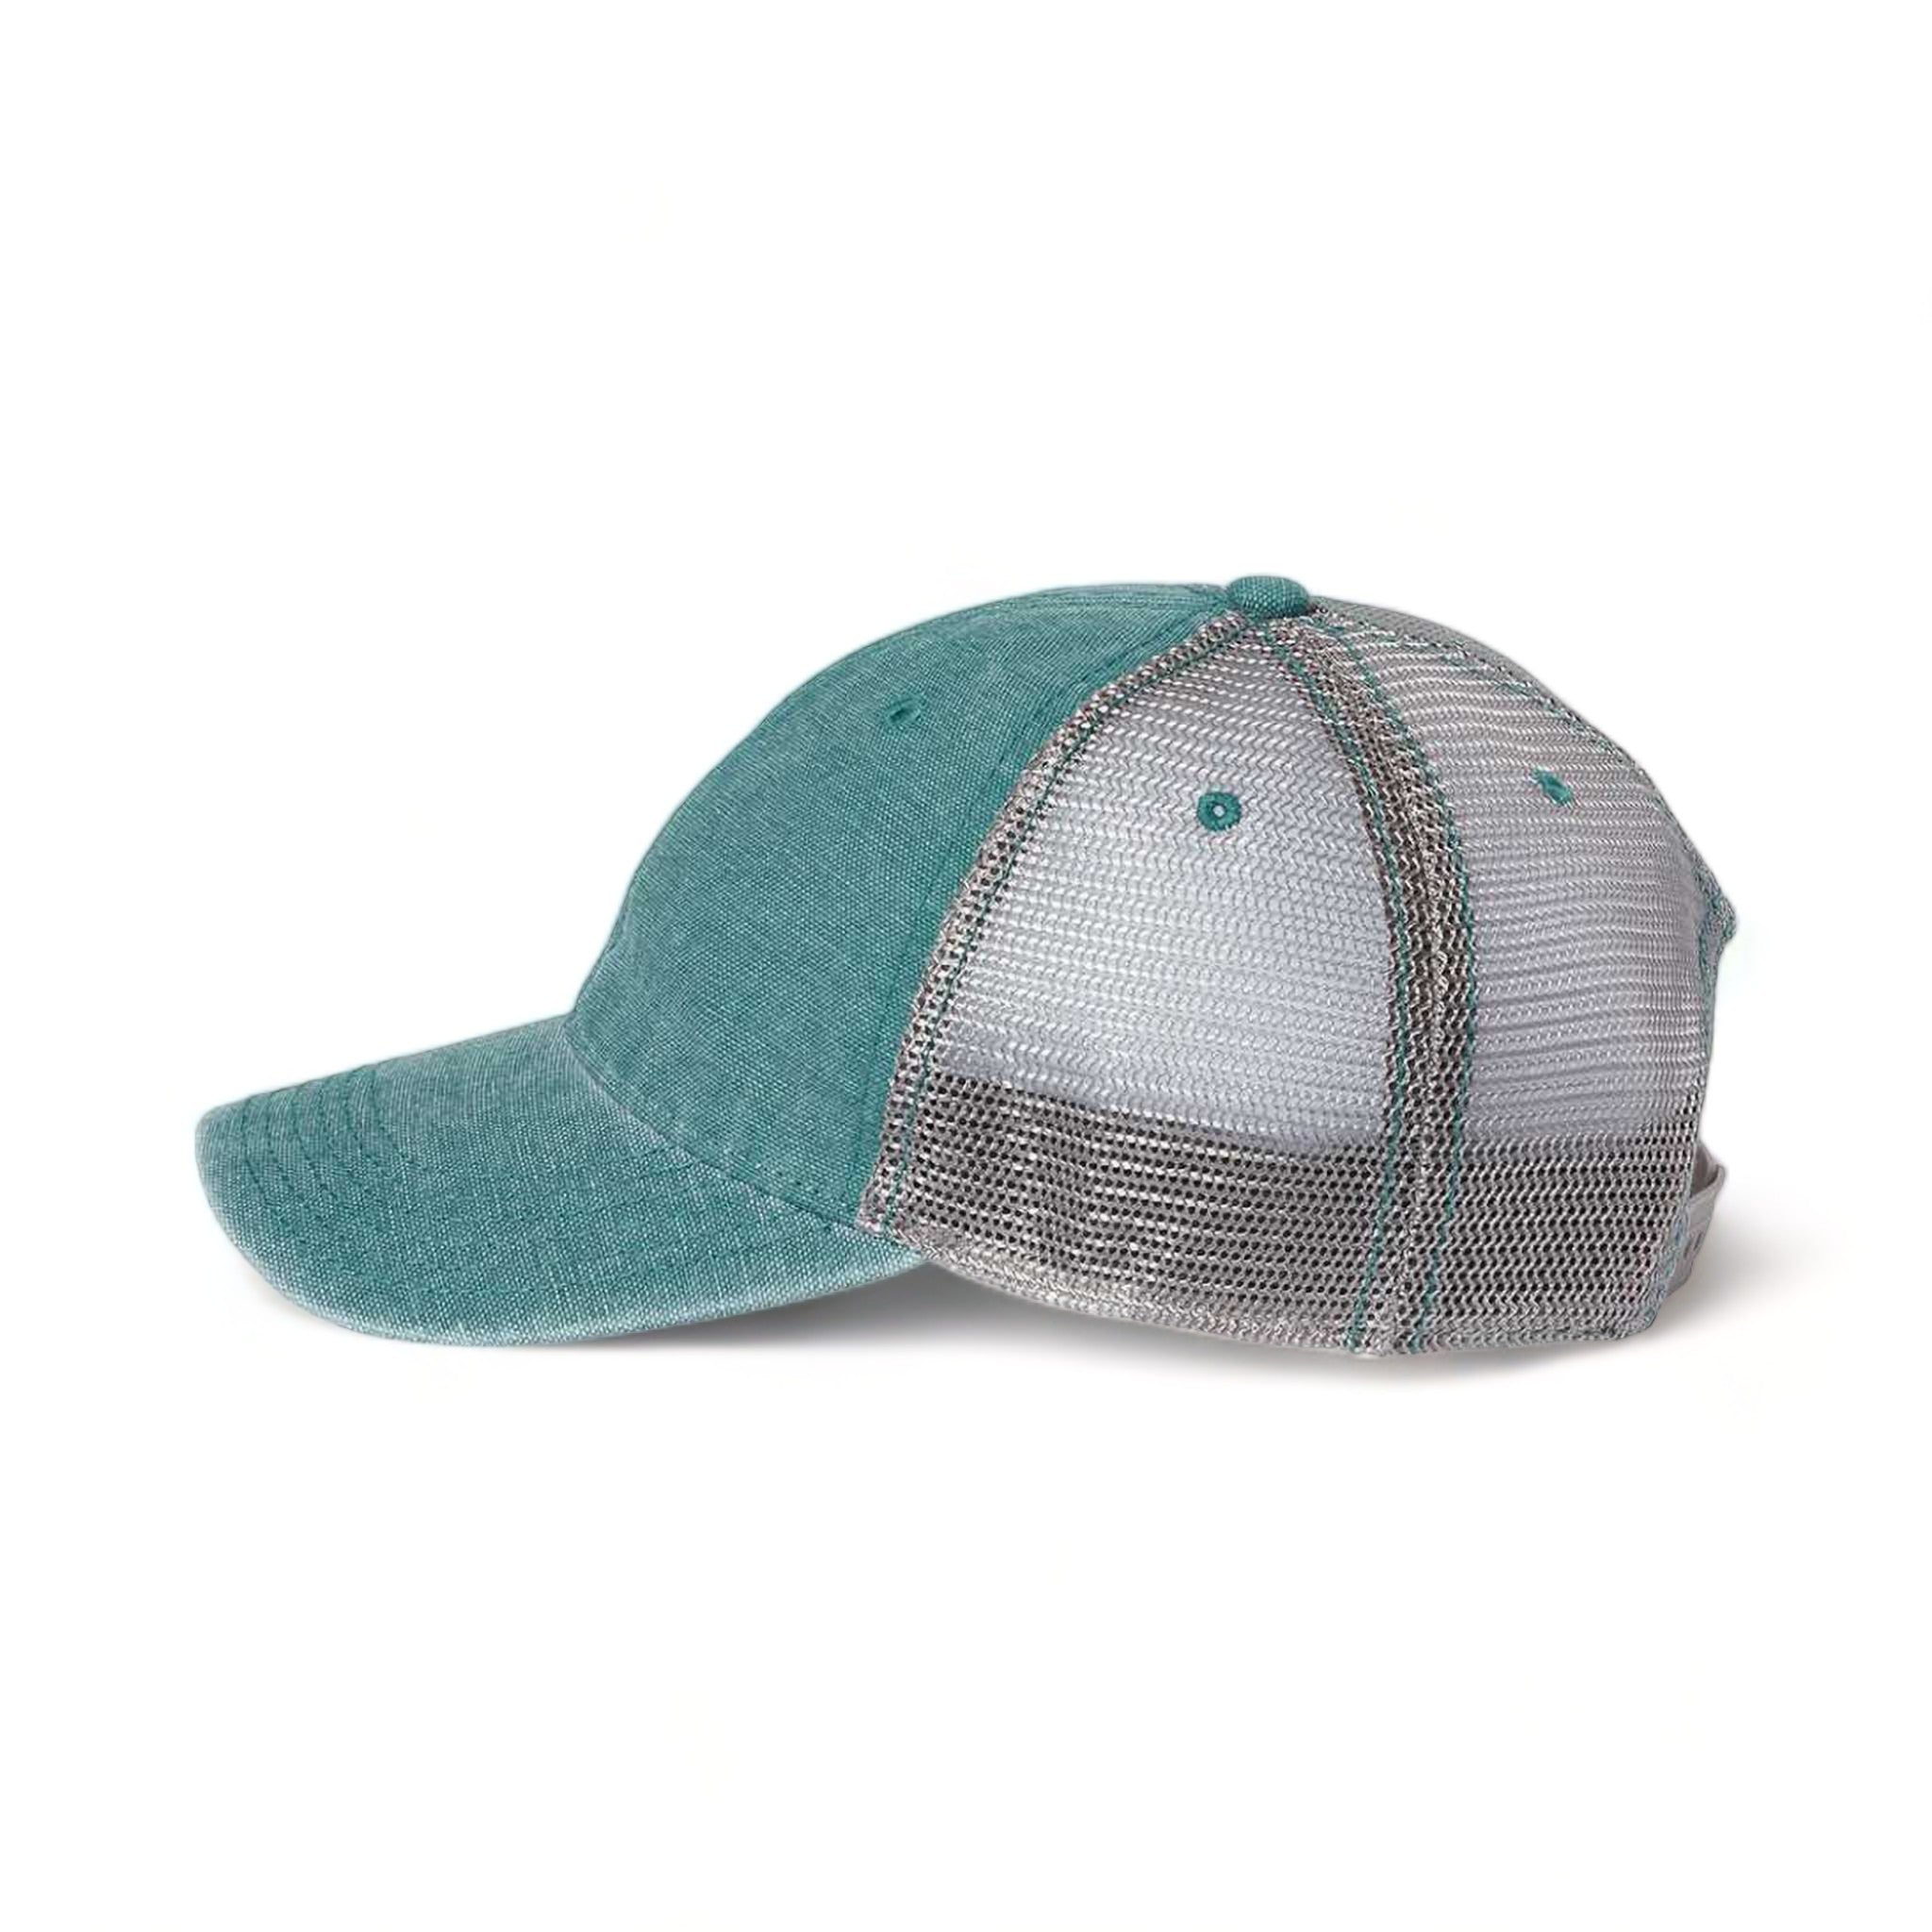 Side view of LEGACY DTA custom hat in marine blue and grey